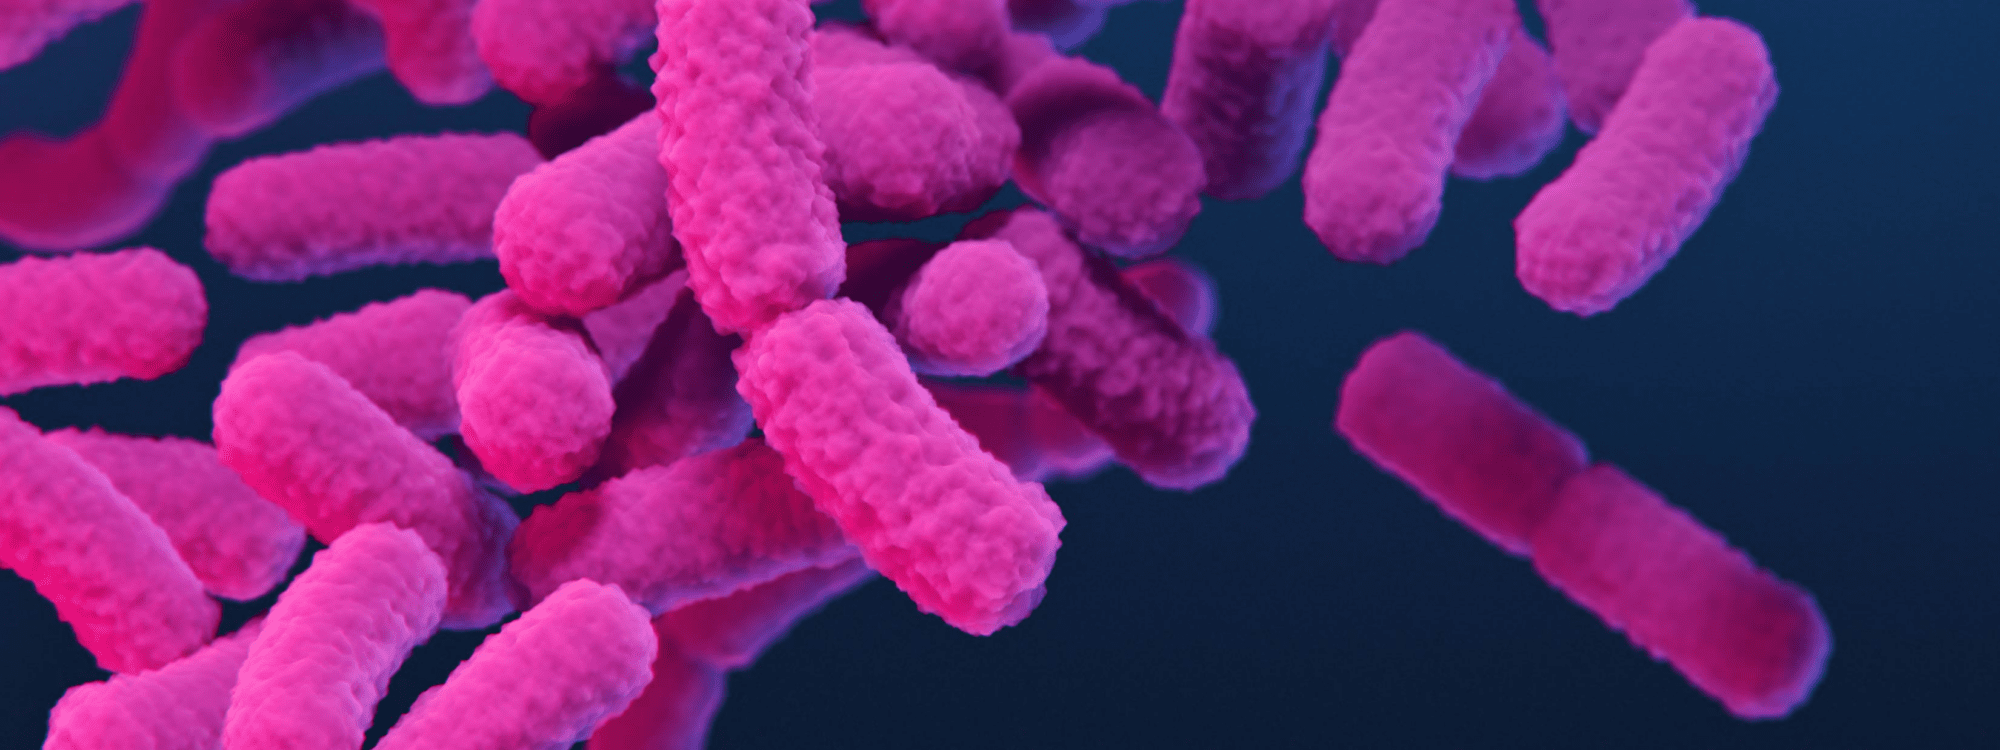 pink rough cylinder-shaped bacteria cells clustered in a 3D rendering